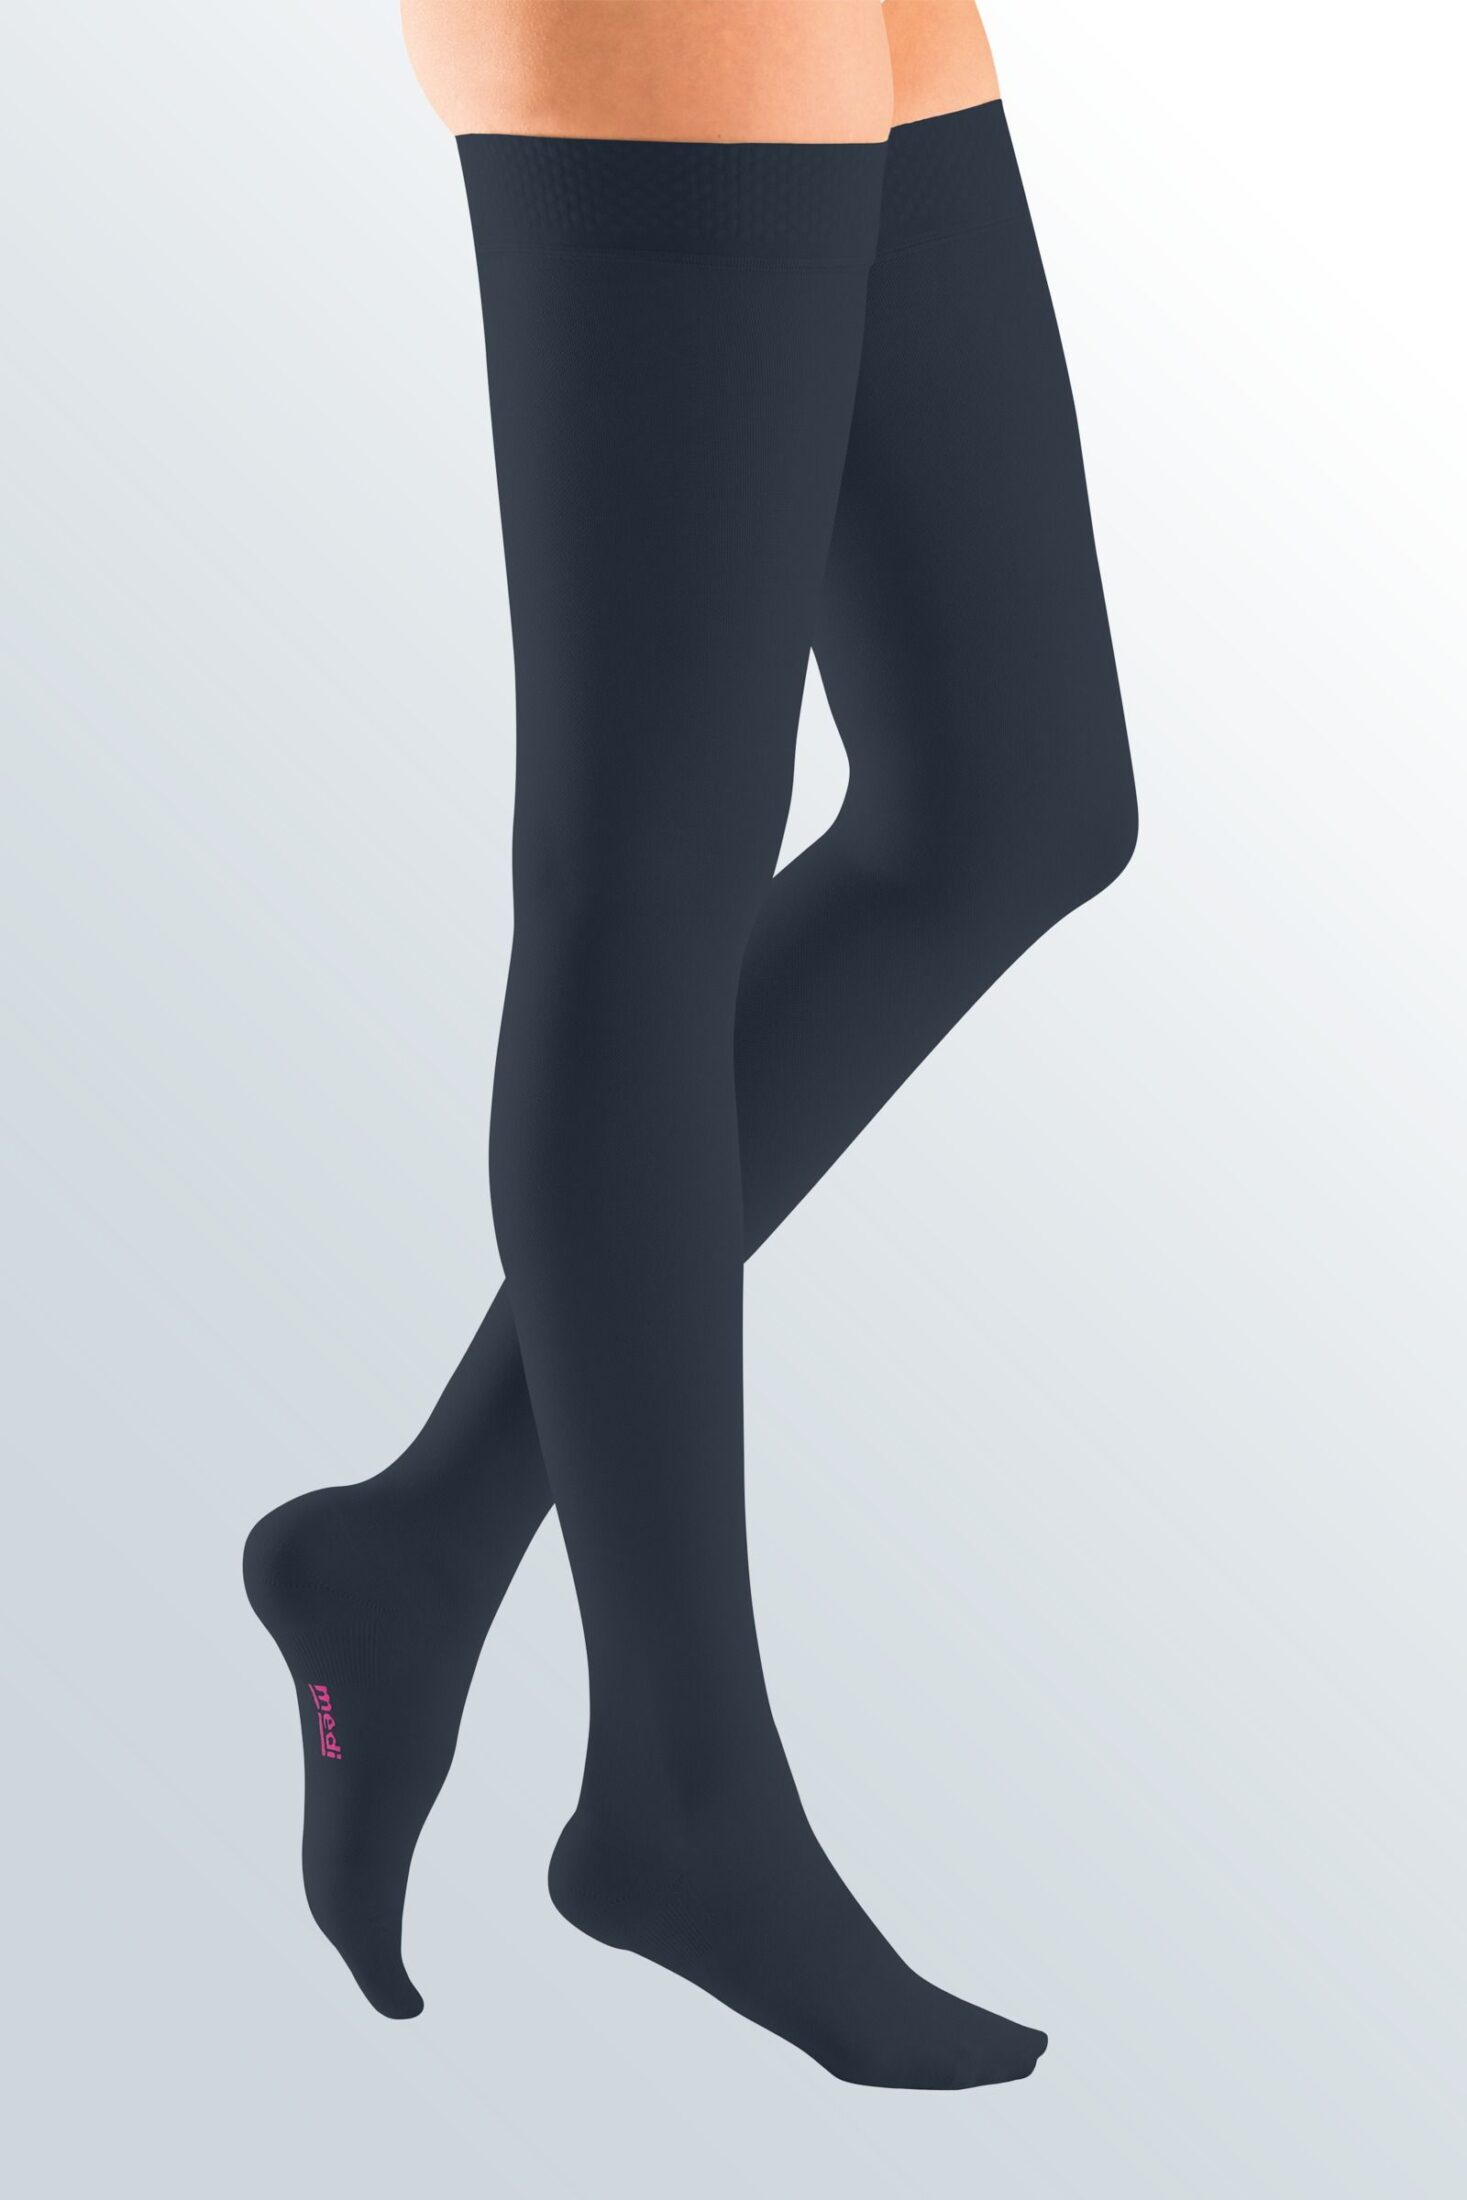 Medical compression stockings for men and women